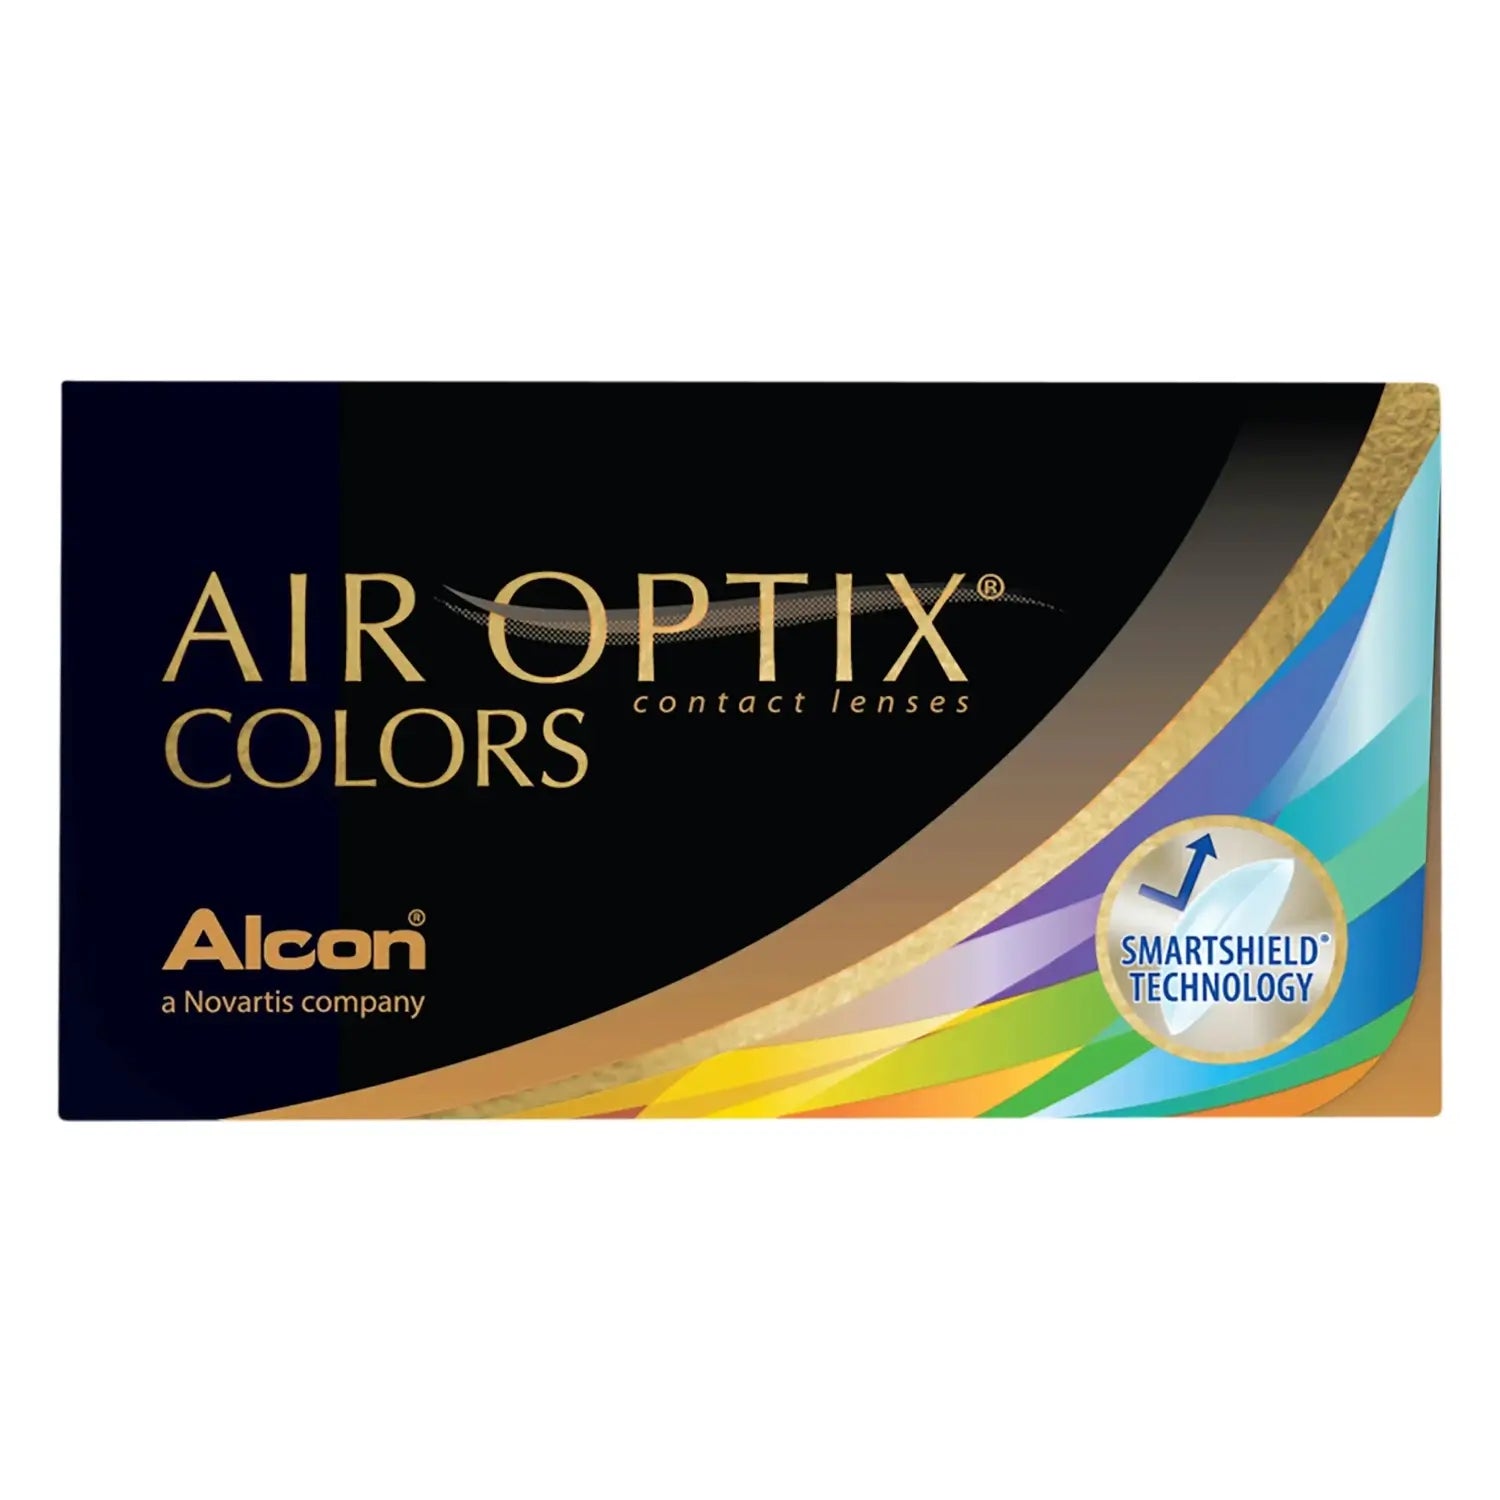 Certified Air Optix COLORS monthly Contact Lenses by Alcon on sale online at The Optical Co at the best prices